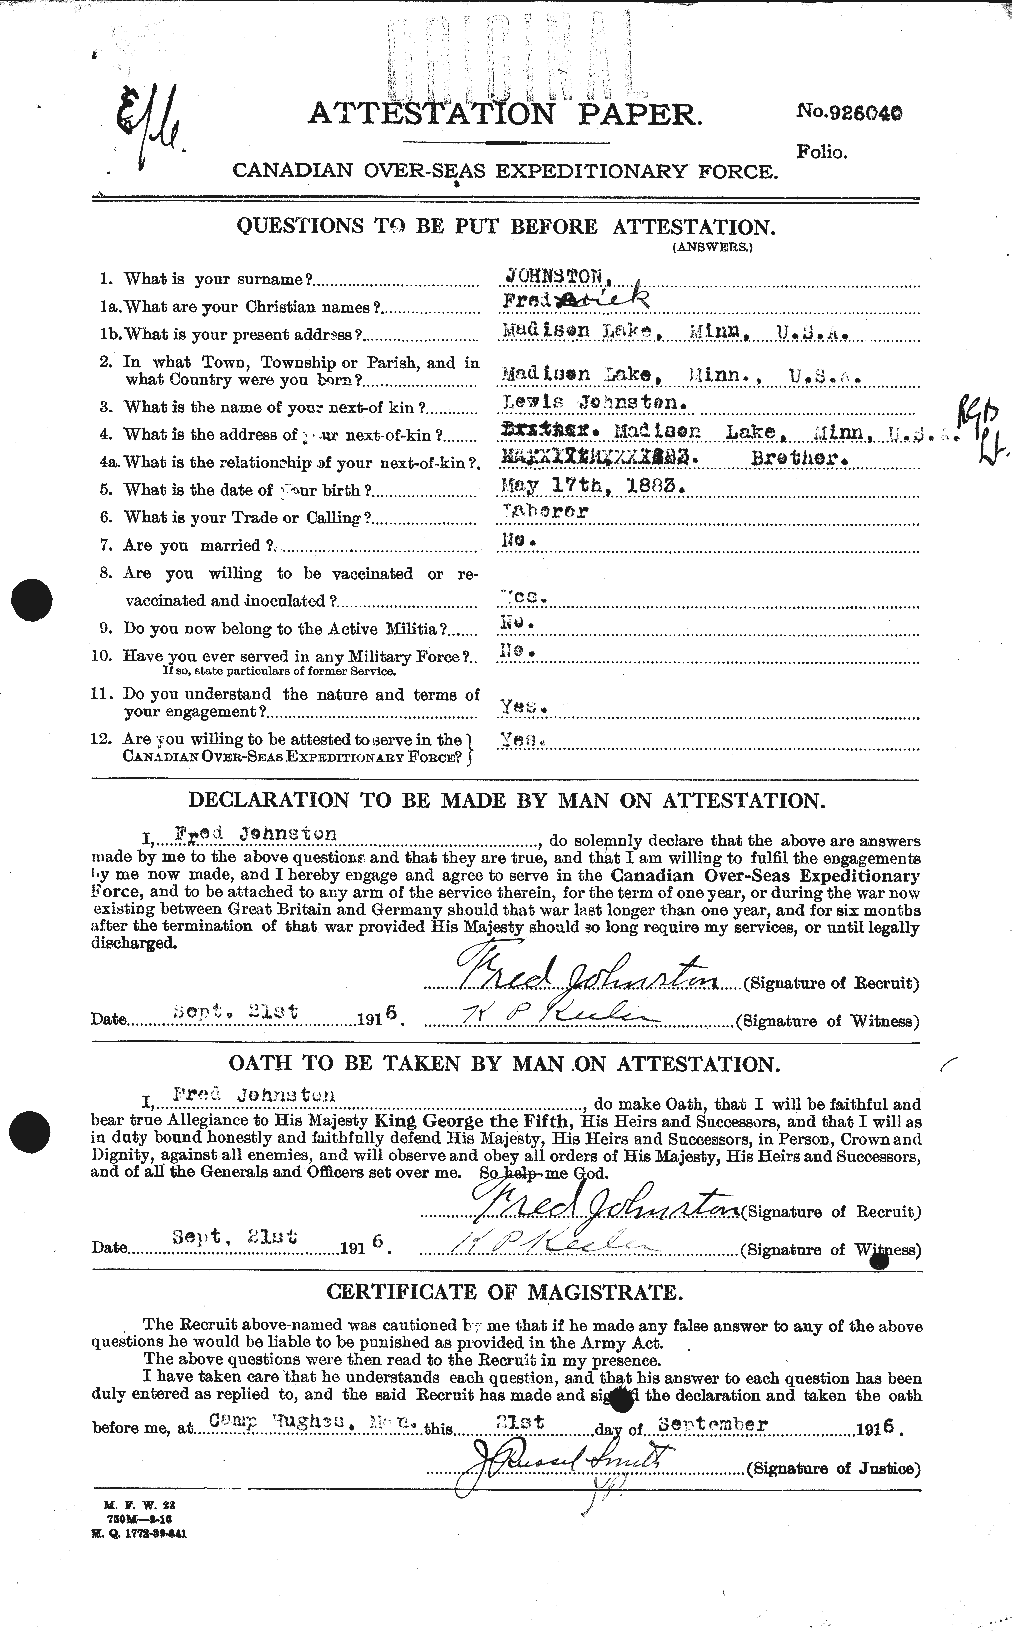 Personnel Records of the First World War - CEF 423292a